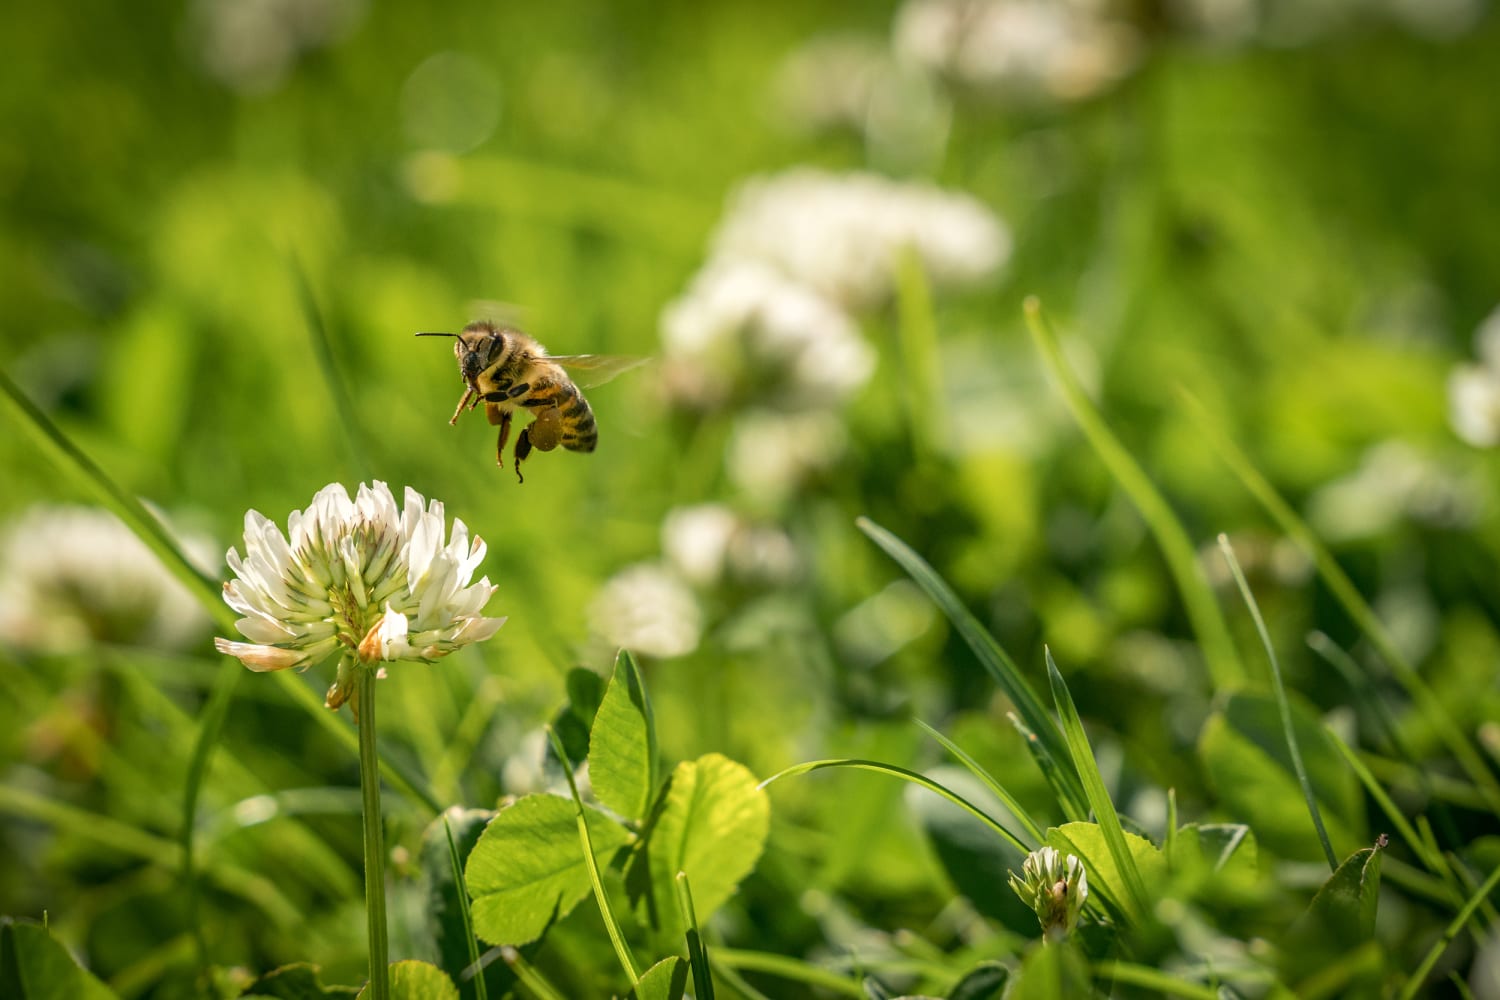 No Mow May' encourages homeowners to help bees by letting their lawns grow